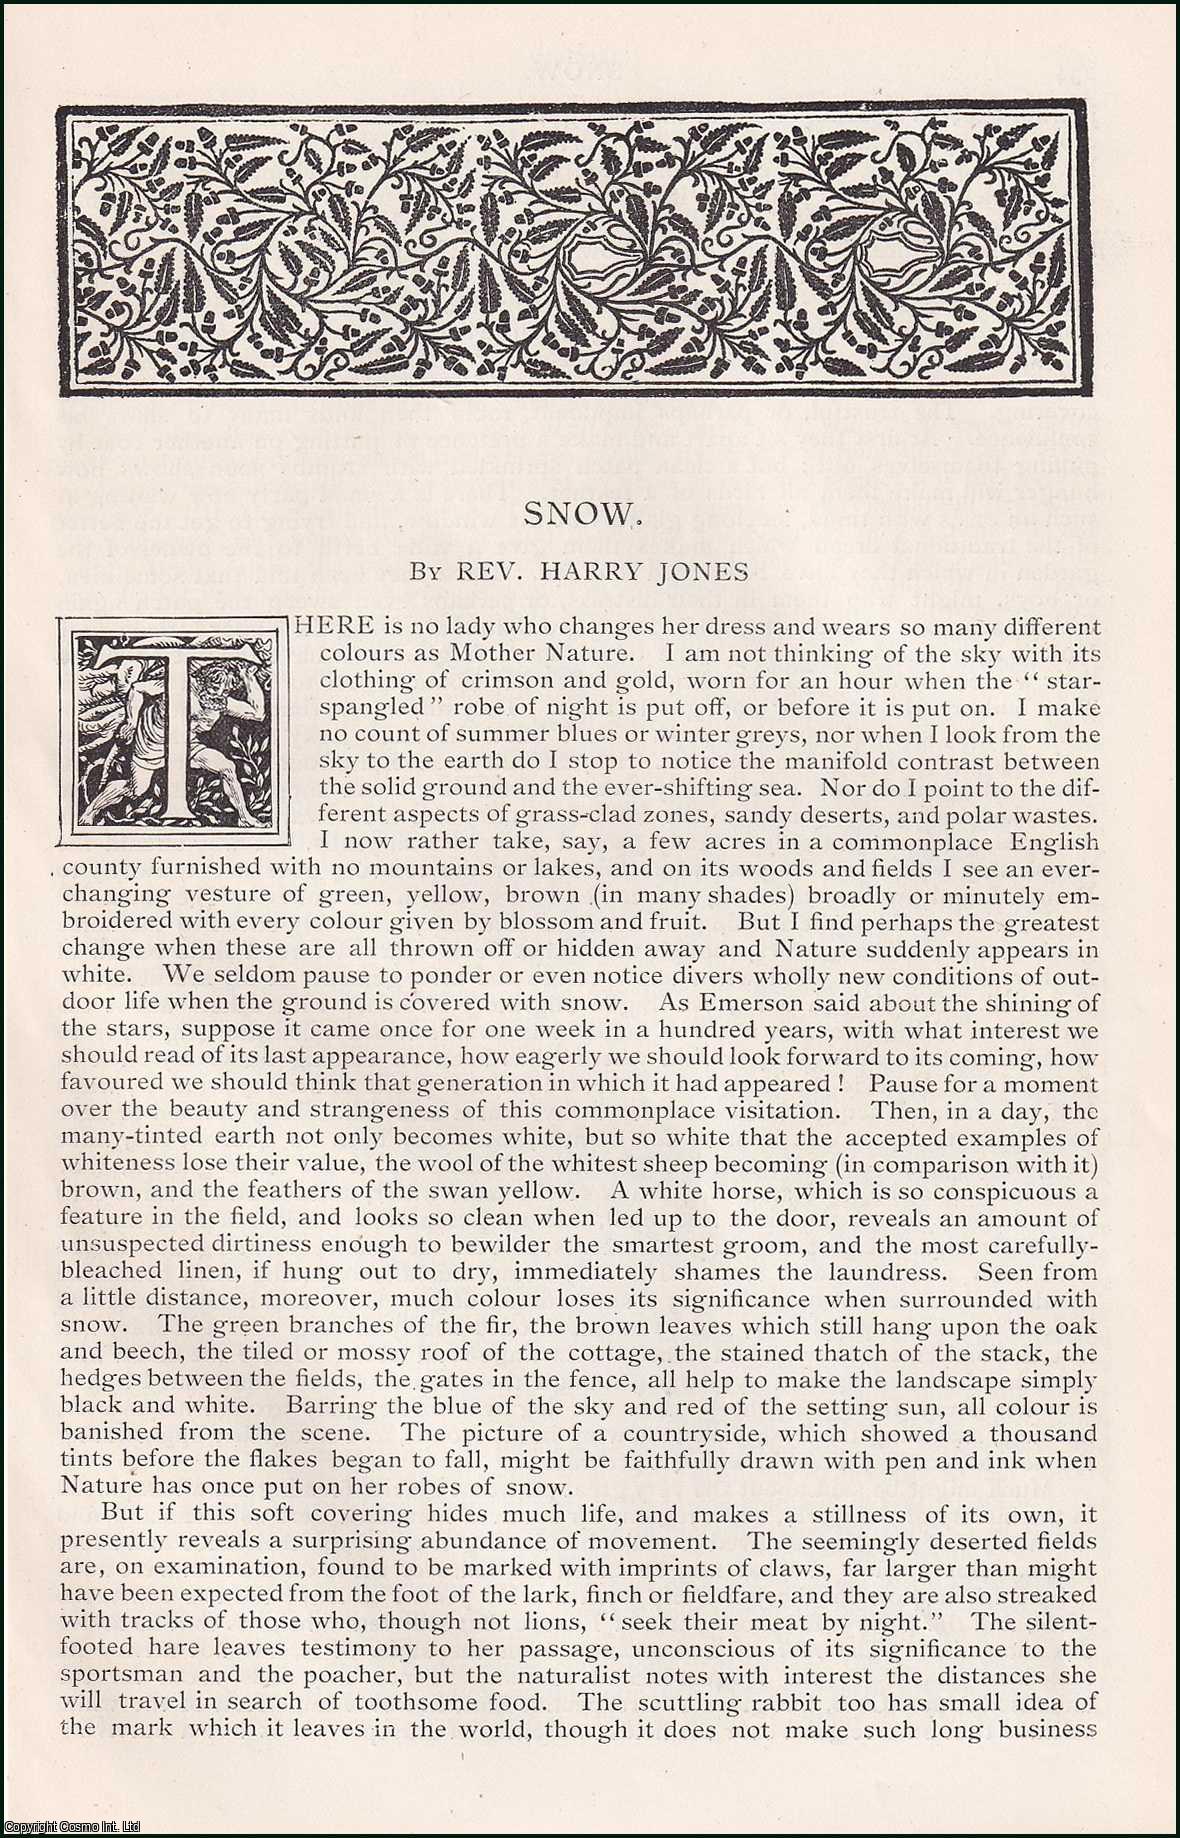 Rev. Harry Jones - Snow. An original article from the English Illustrated Magazine, 1890.